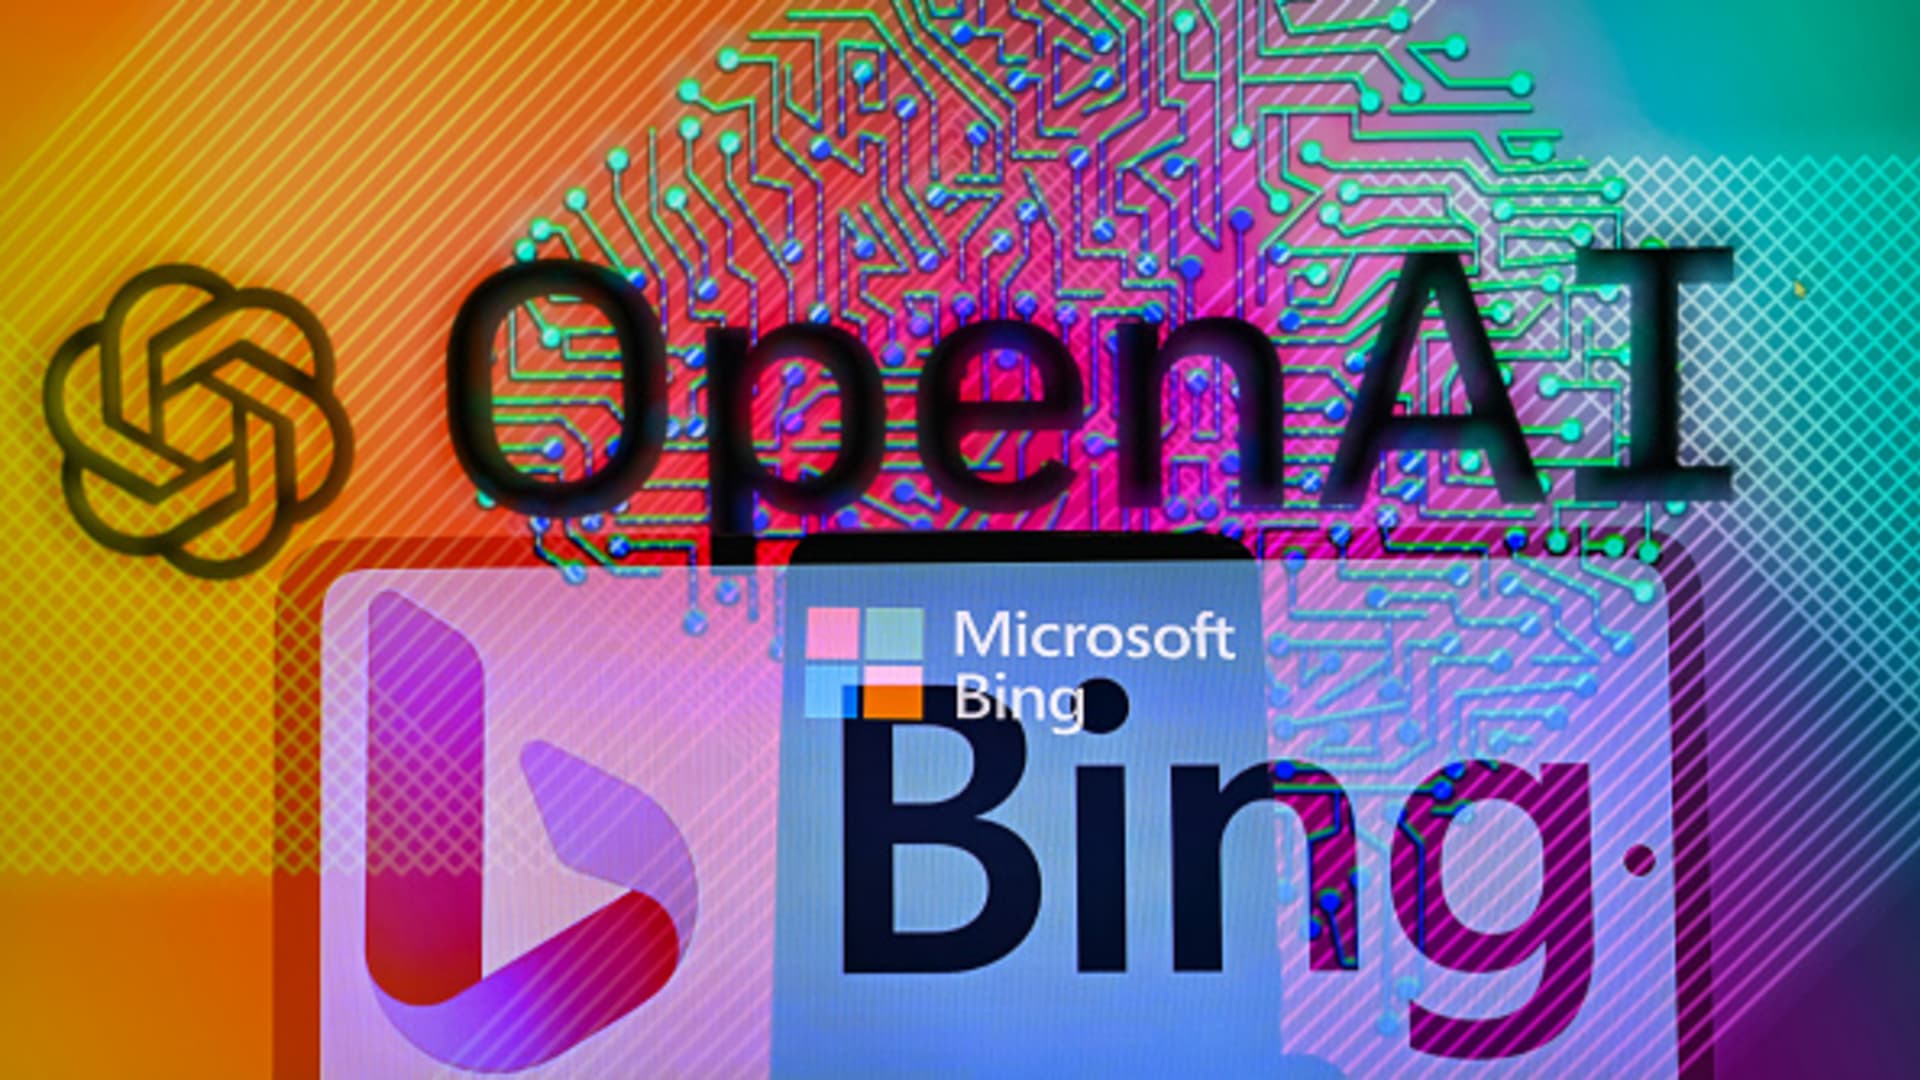 Microsoft Bing now uses OpenAI’s DALL-E A.I. to turn text into images